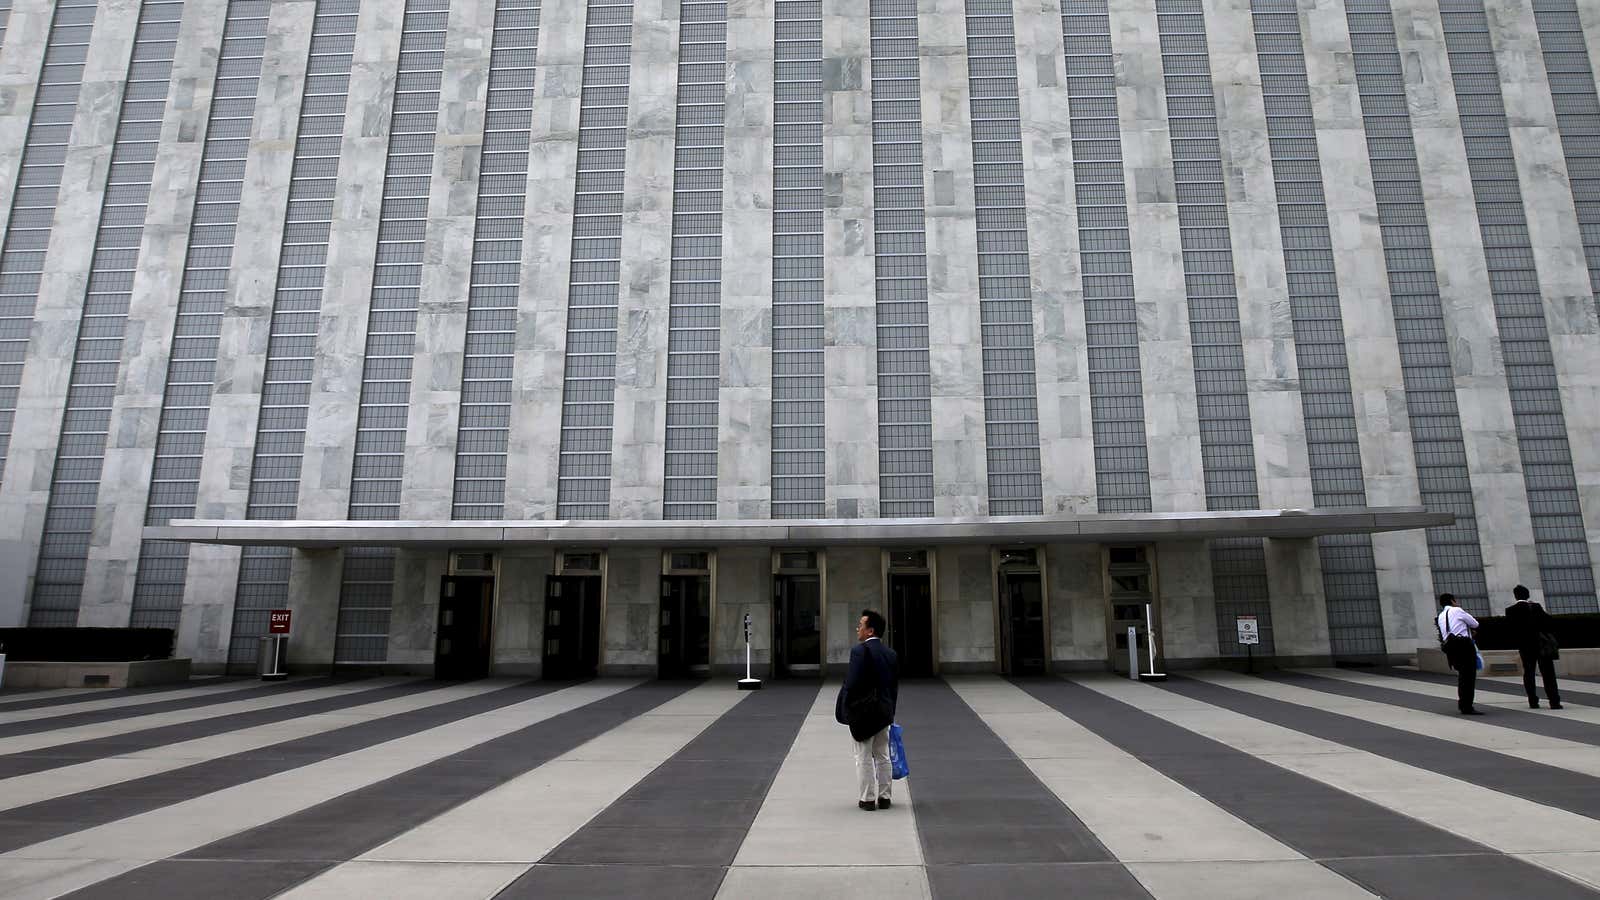 A man pauses outside the entrance to the Assembly Building at the United Nations headquarters in New York City, September 21, 2015. As leaders from…